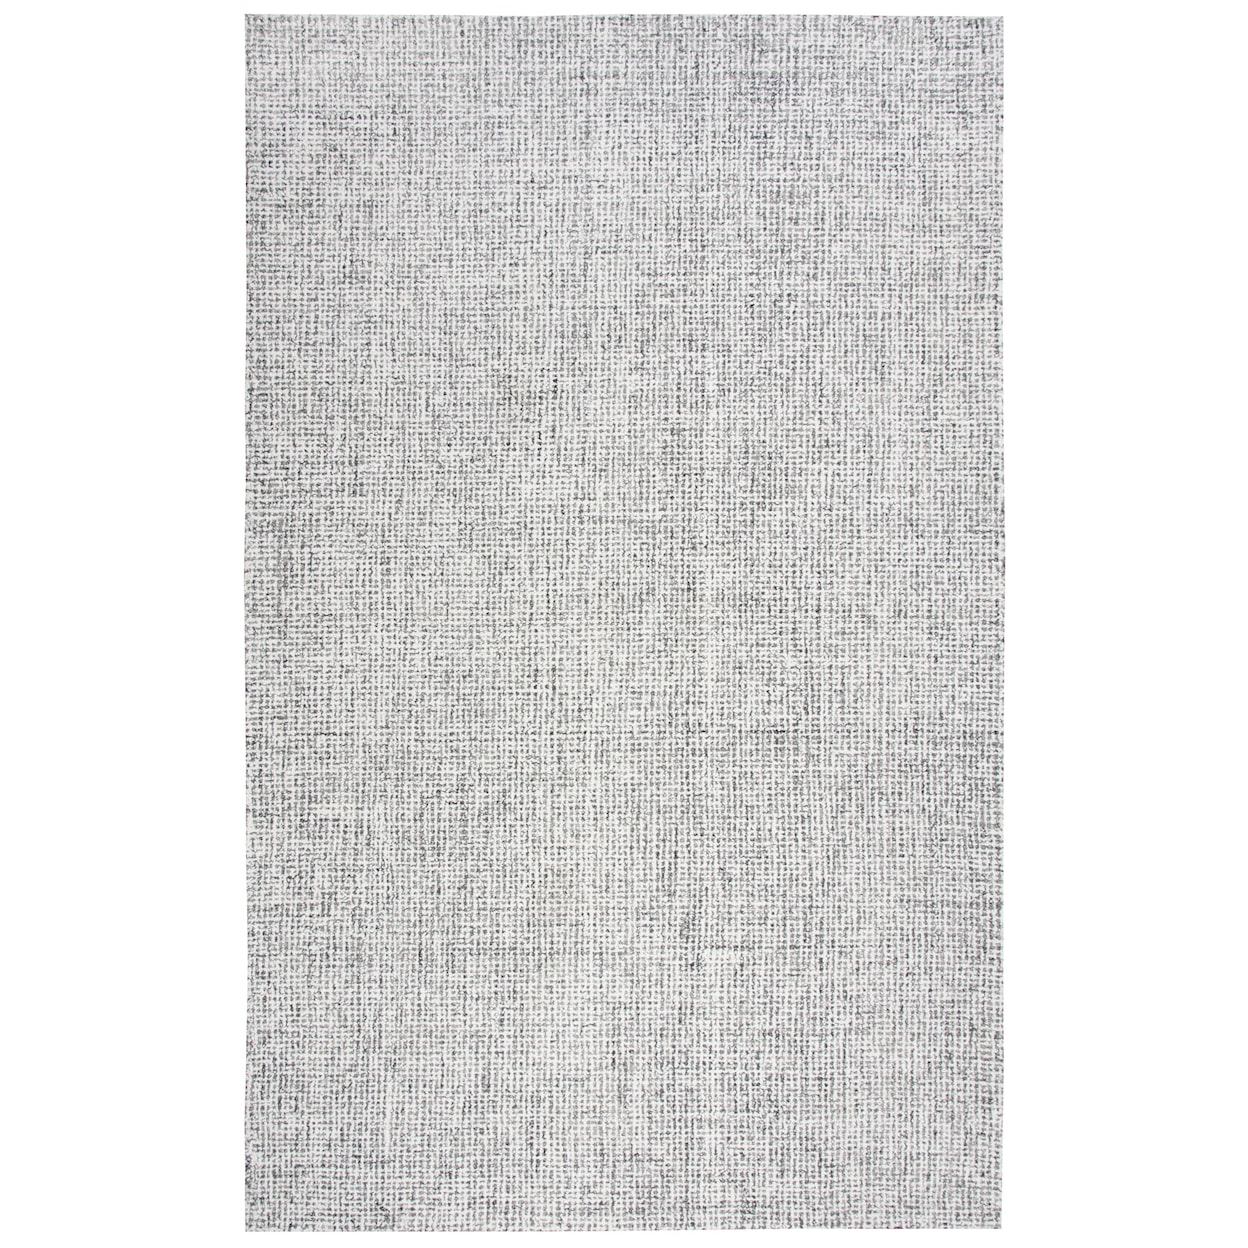 Rizzy Home Brindleton 5' x 8' Rectangle Rug